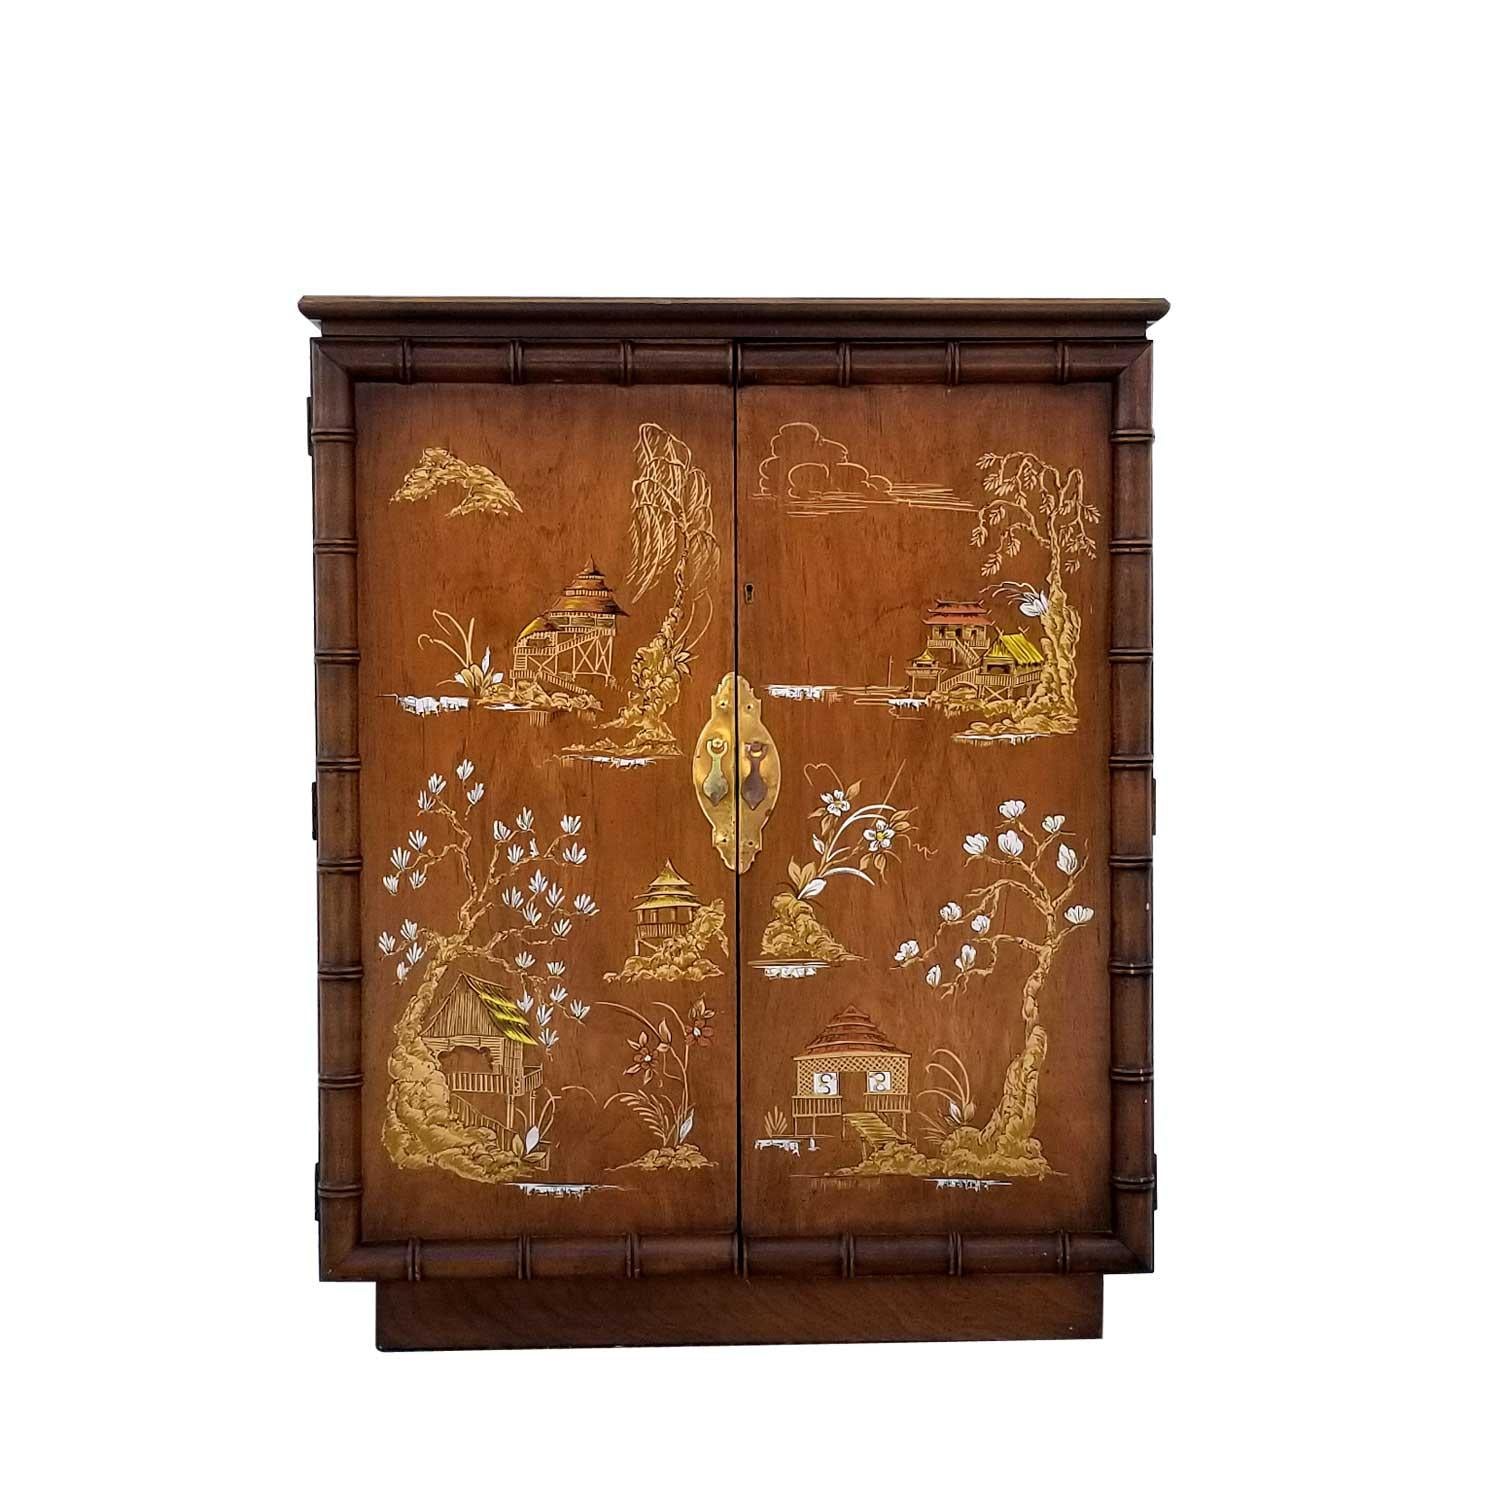 Vintage bar cabinet by Lane Furniture company. The exceedingly charming design features a hand painted Oriental edifice. The facade is further adorned with faux bamboo trim. The Chinese and bamboo elements are very on trend. Open the doors to reveal